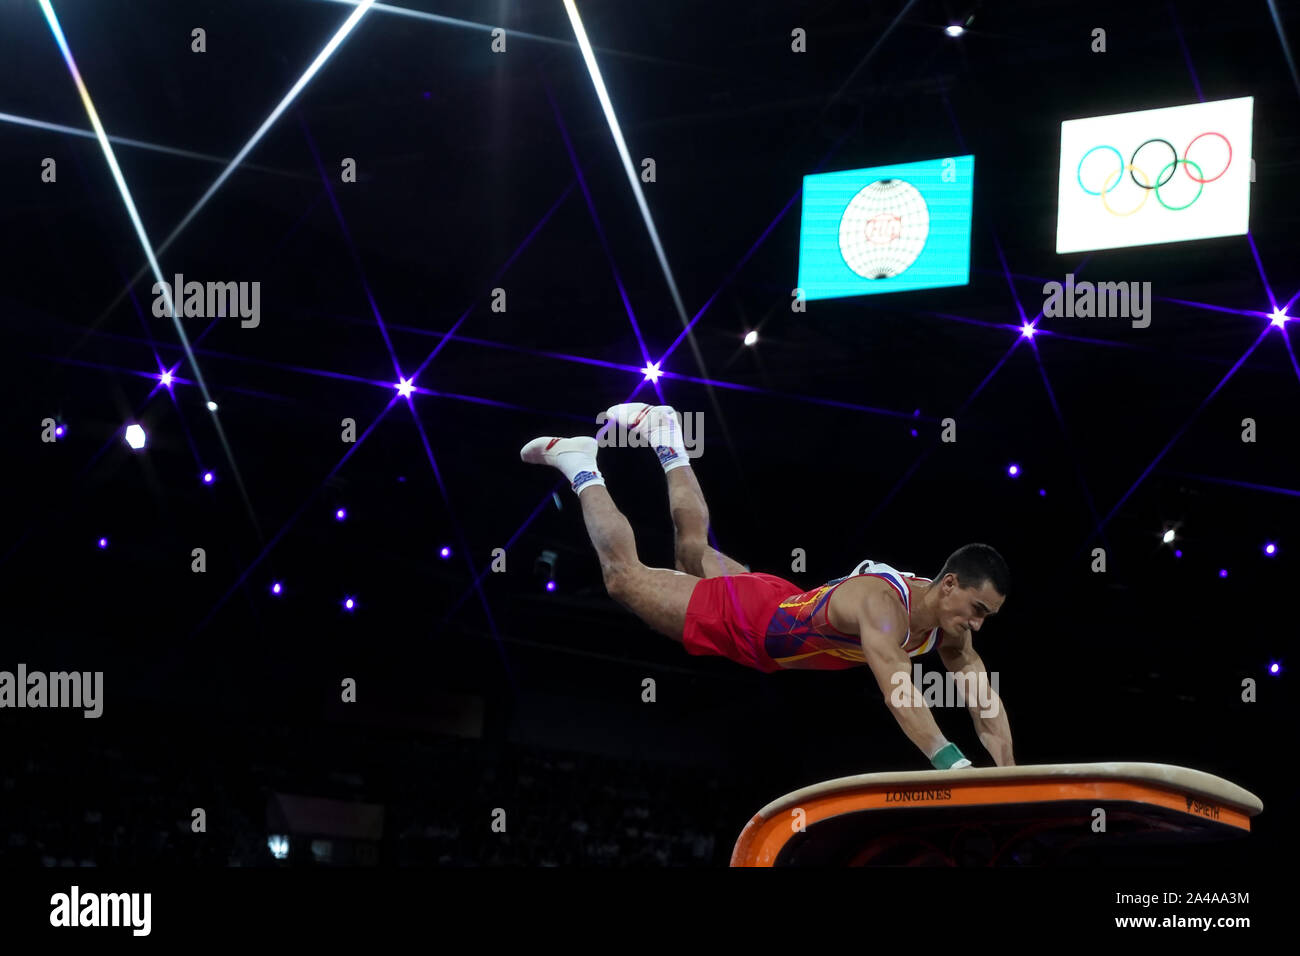 Stuttgart, Germany. 13th Oct, 2019. Marian Dragulescu of Romania competes during the Men's Vault Final at the 2019 FIG Artistic Gymnastics World Championships in Stuttgart, Germany, Oct. 13, 2019. Credit: Zhang Cheng/Xinhua/Alamy Live News Stock Photo